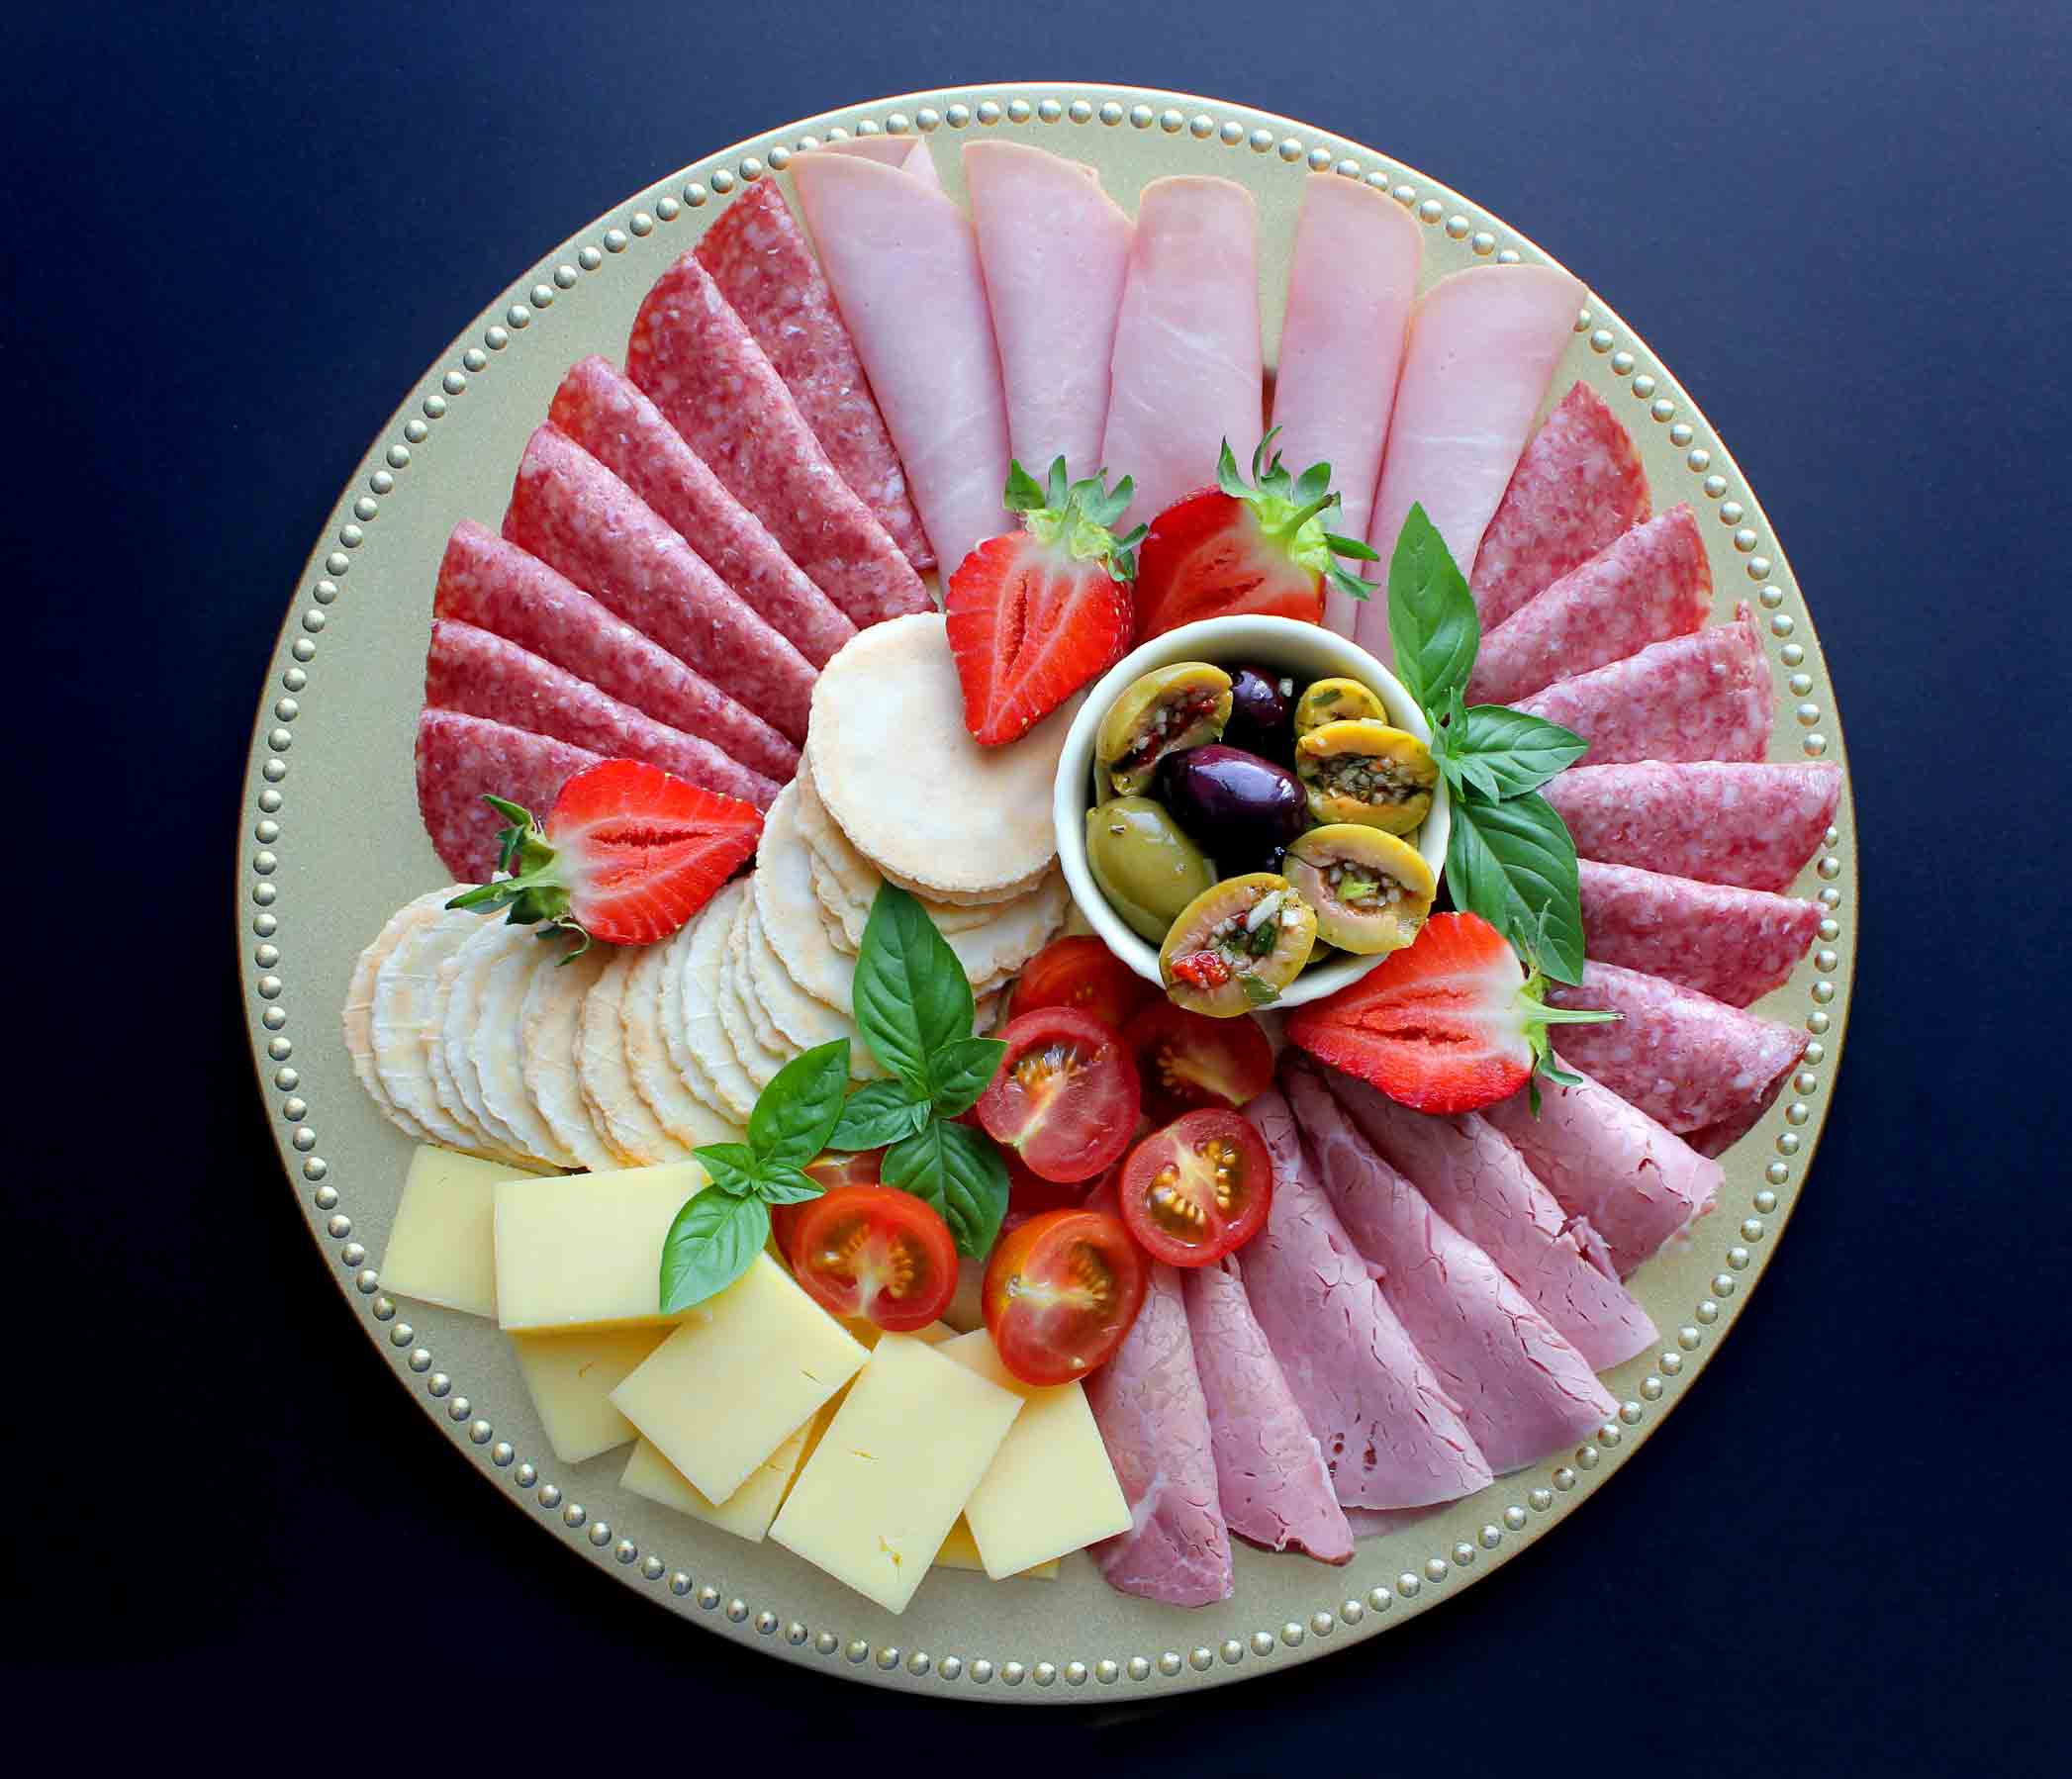 A plate with a variety of meats and cheeses on it.